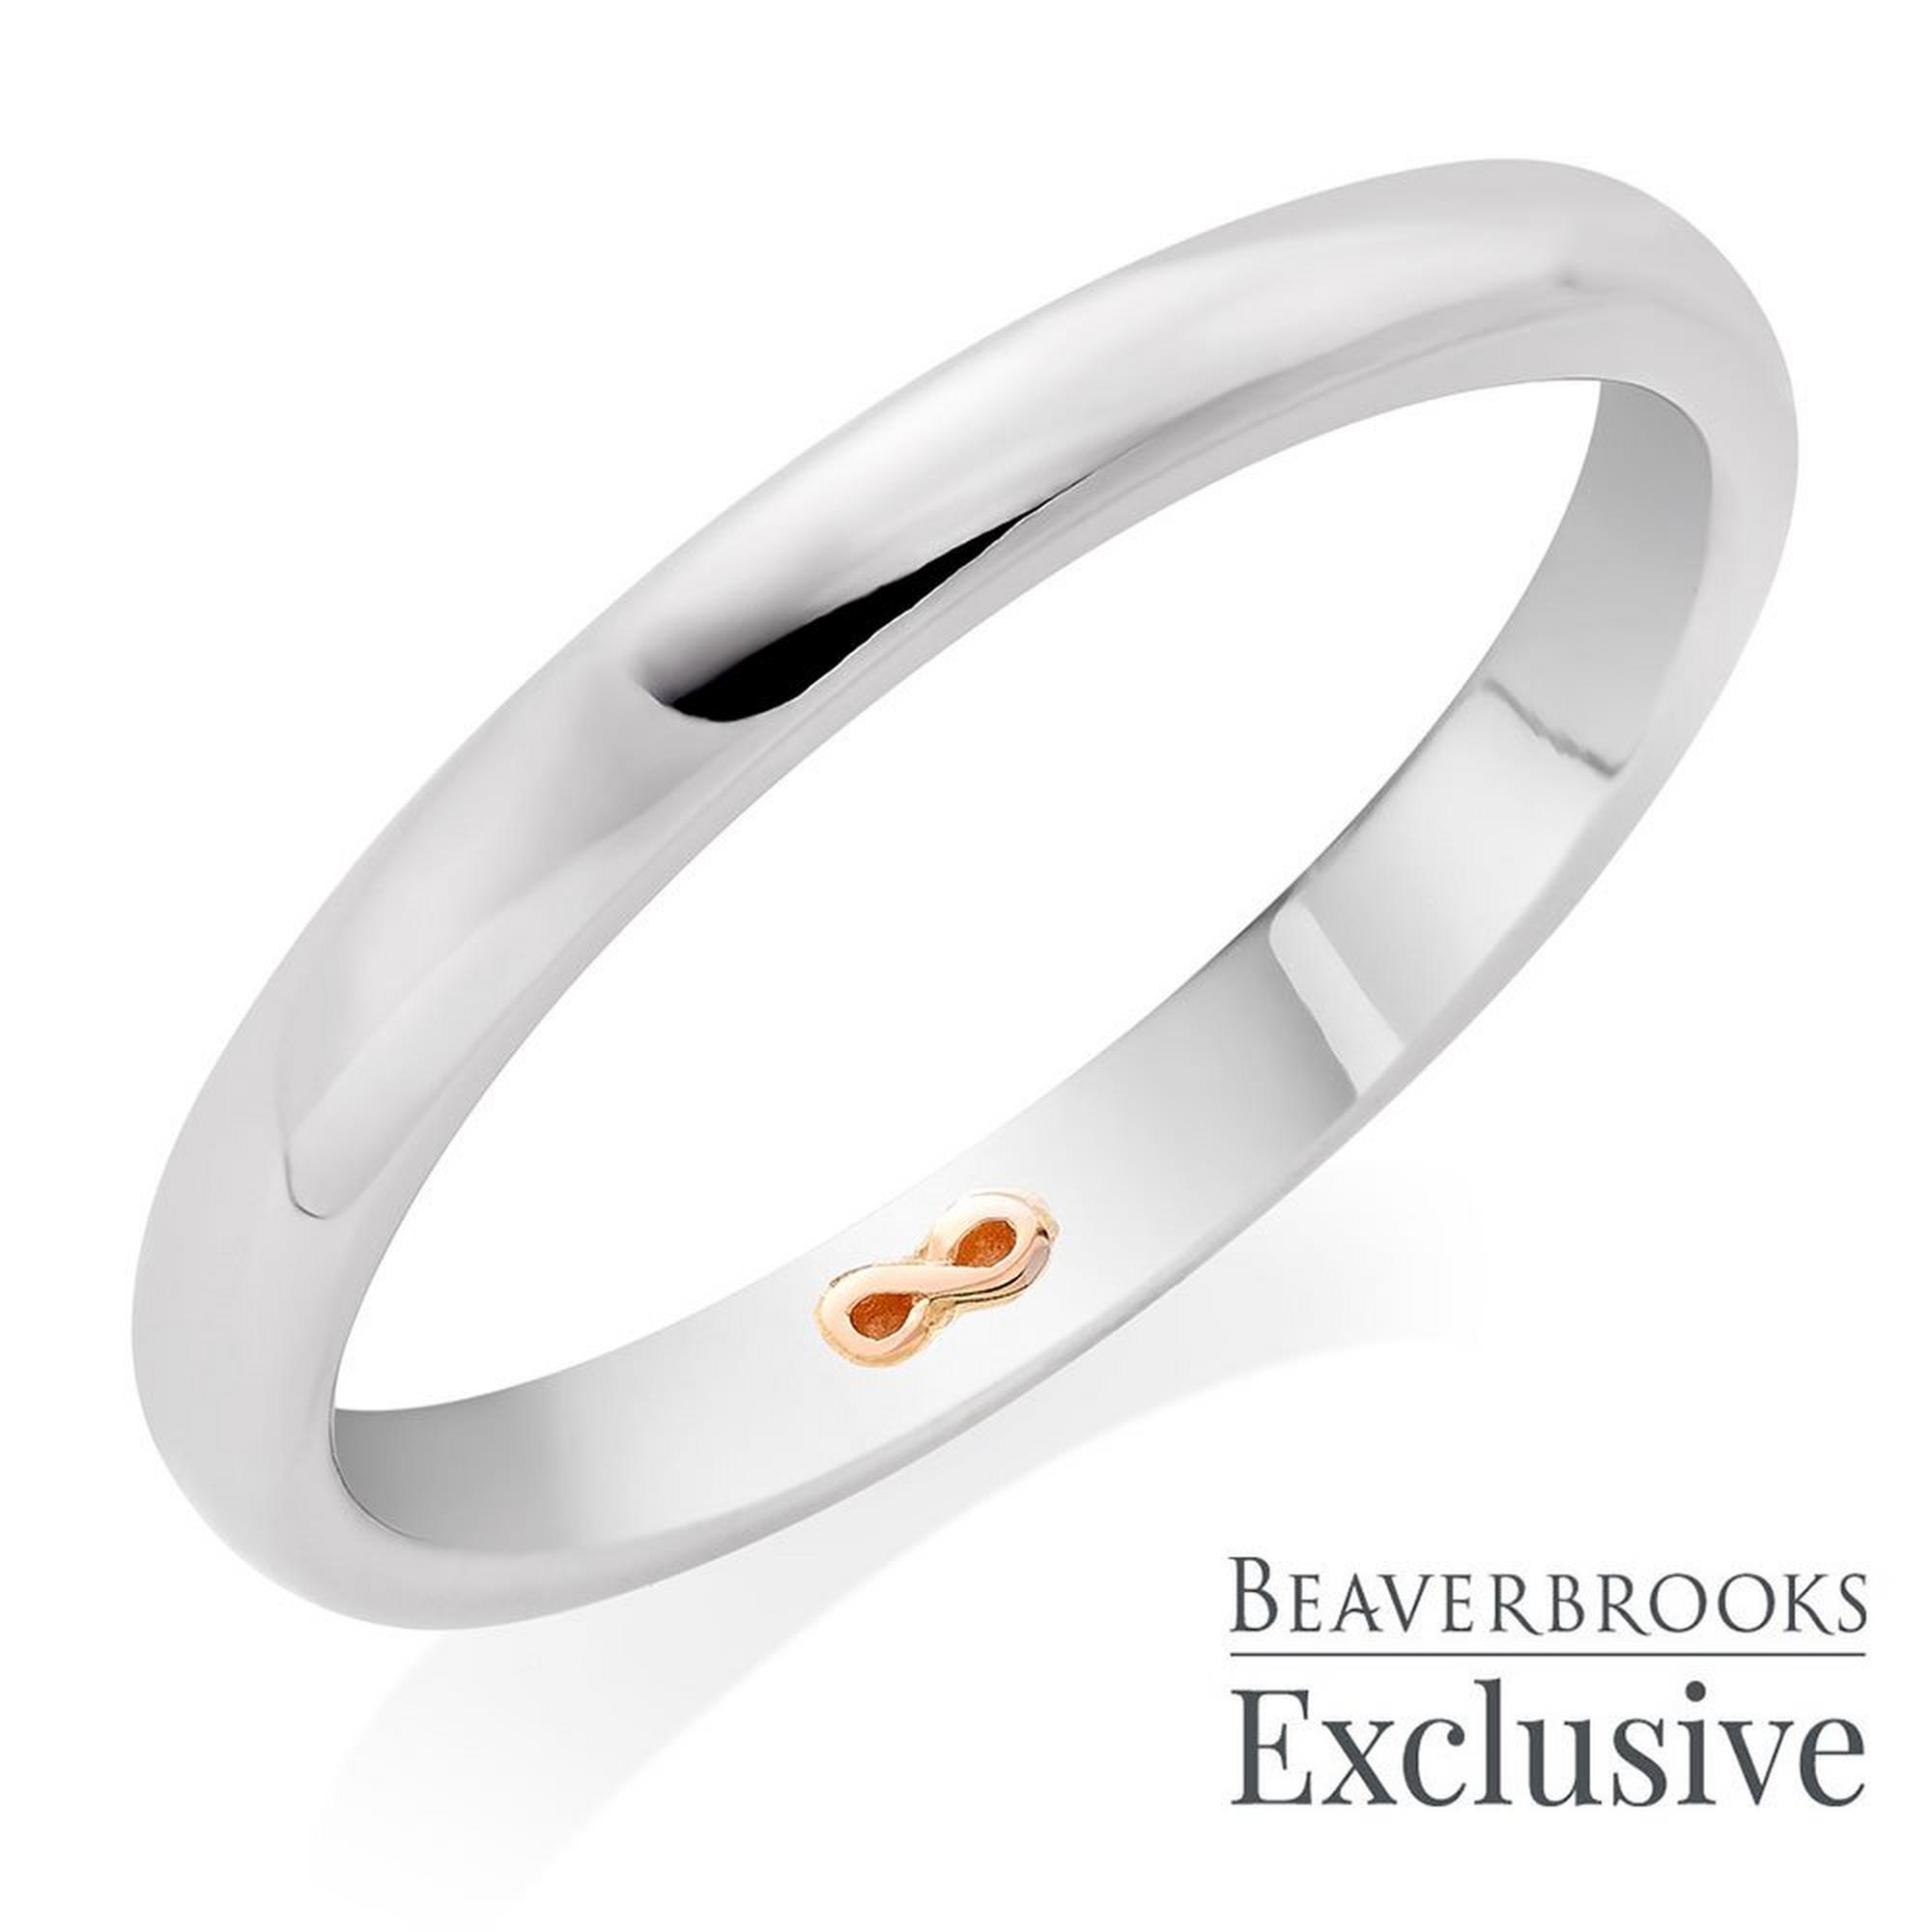 Beyond Brilliance 18ct White Gold and Rose Gold Infinity Ladies Wedding Ring